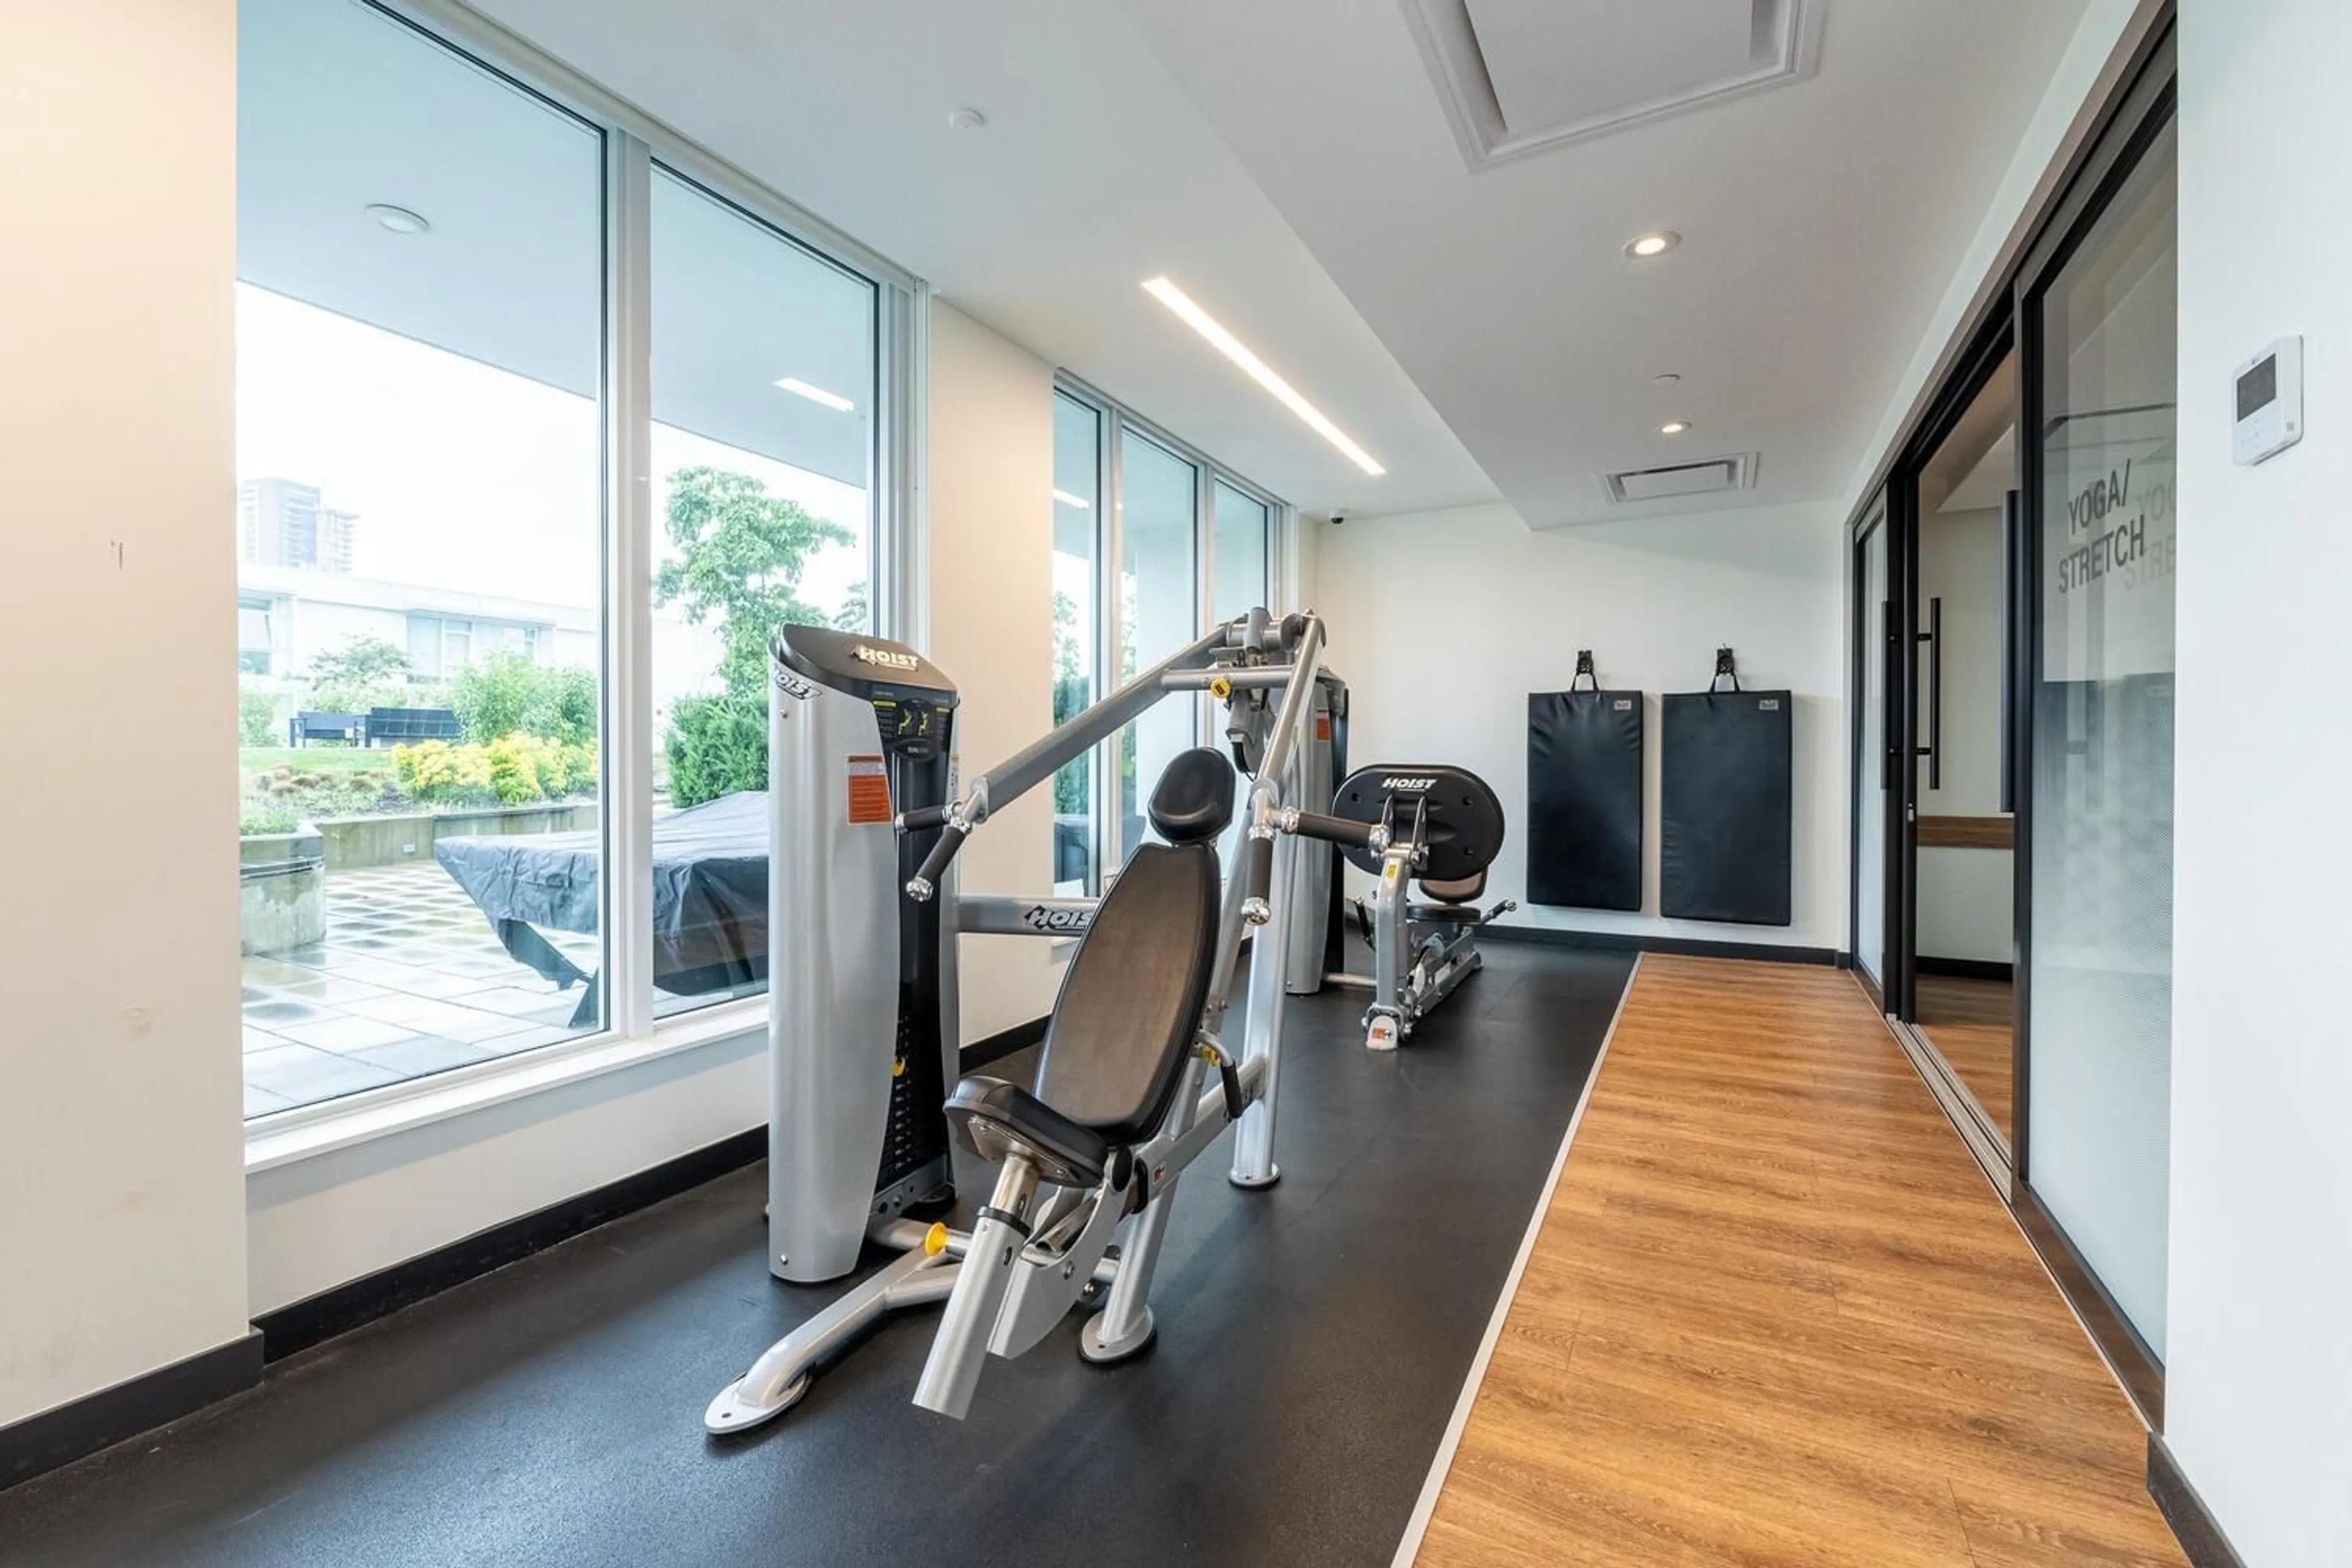 Gym or fitness room for 1505 13685 102 AVENUE, Surrey British Columbia V3T1N7